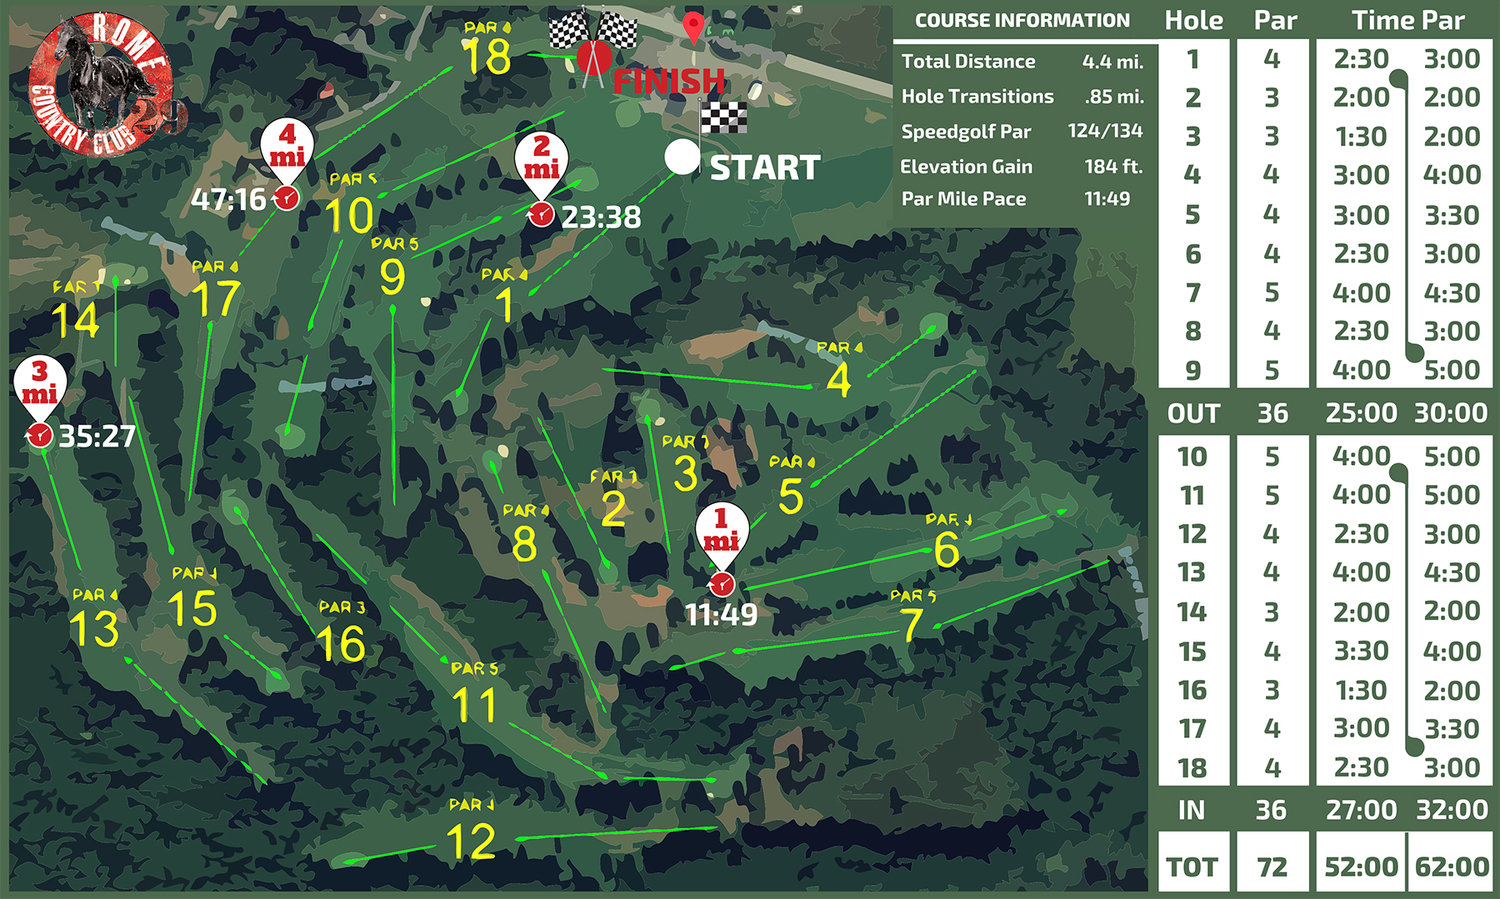 DAY TWO LAYOUT — A GPS shot of Rome Country Club ahead of Monday’s second round of the New York State Speedolf Open.